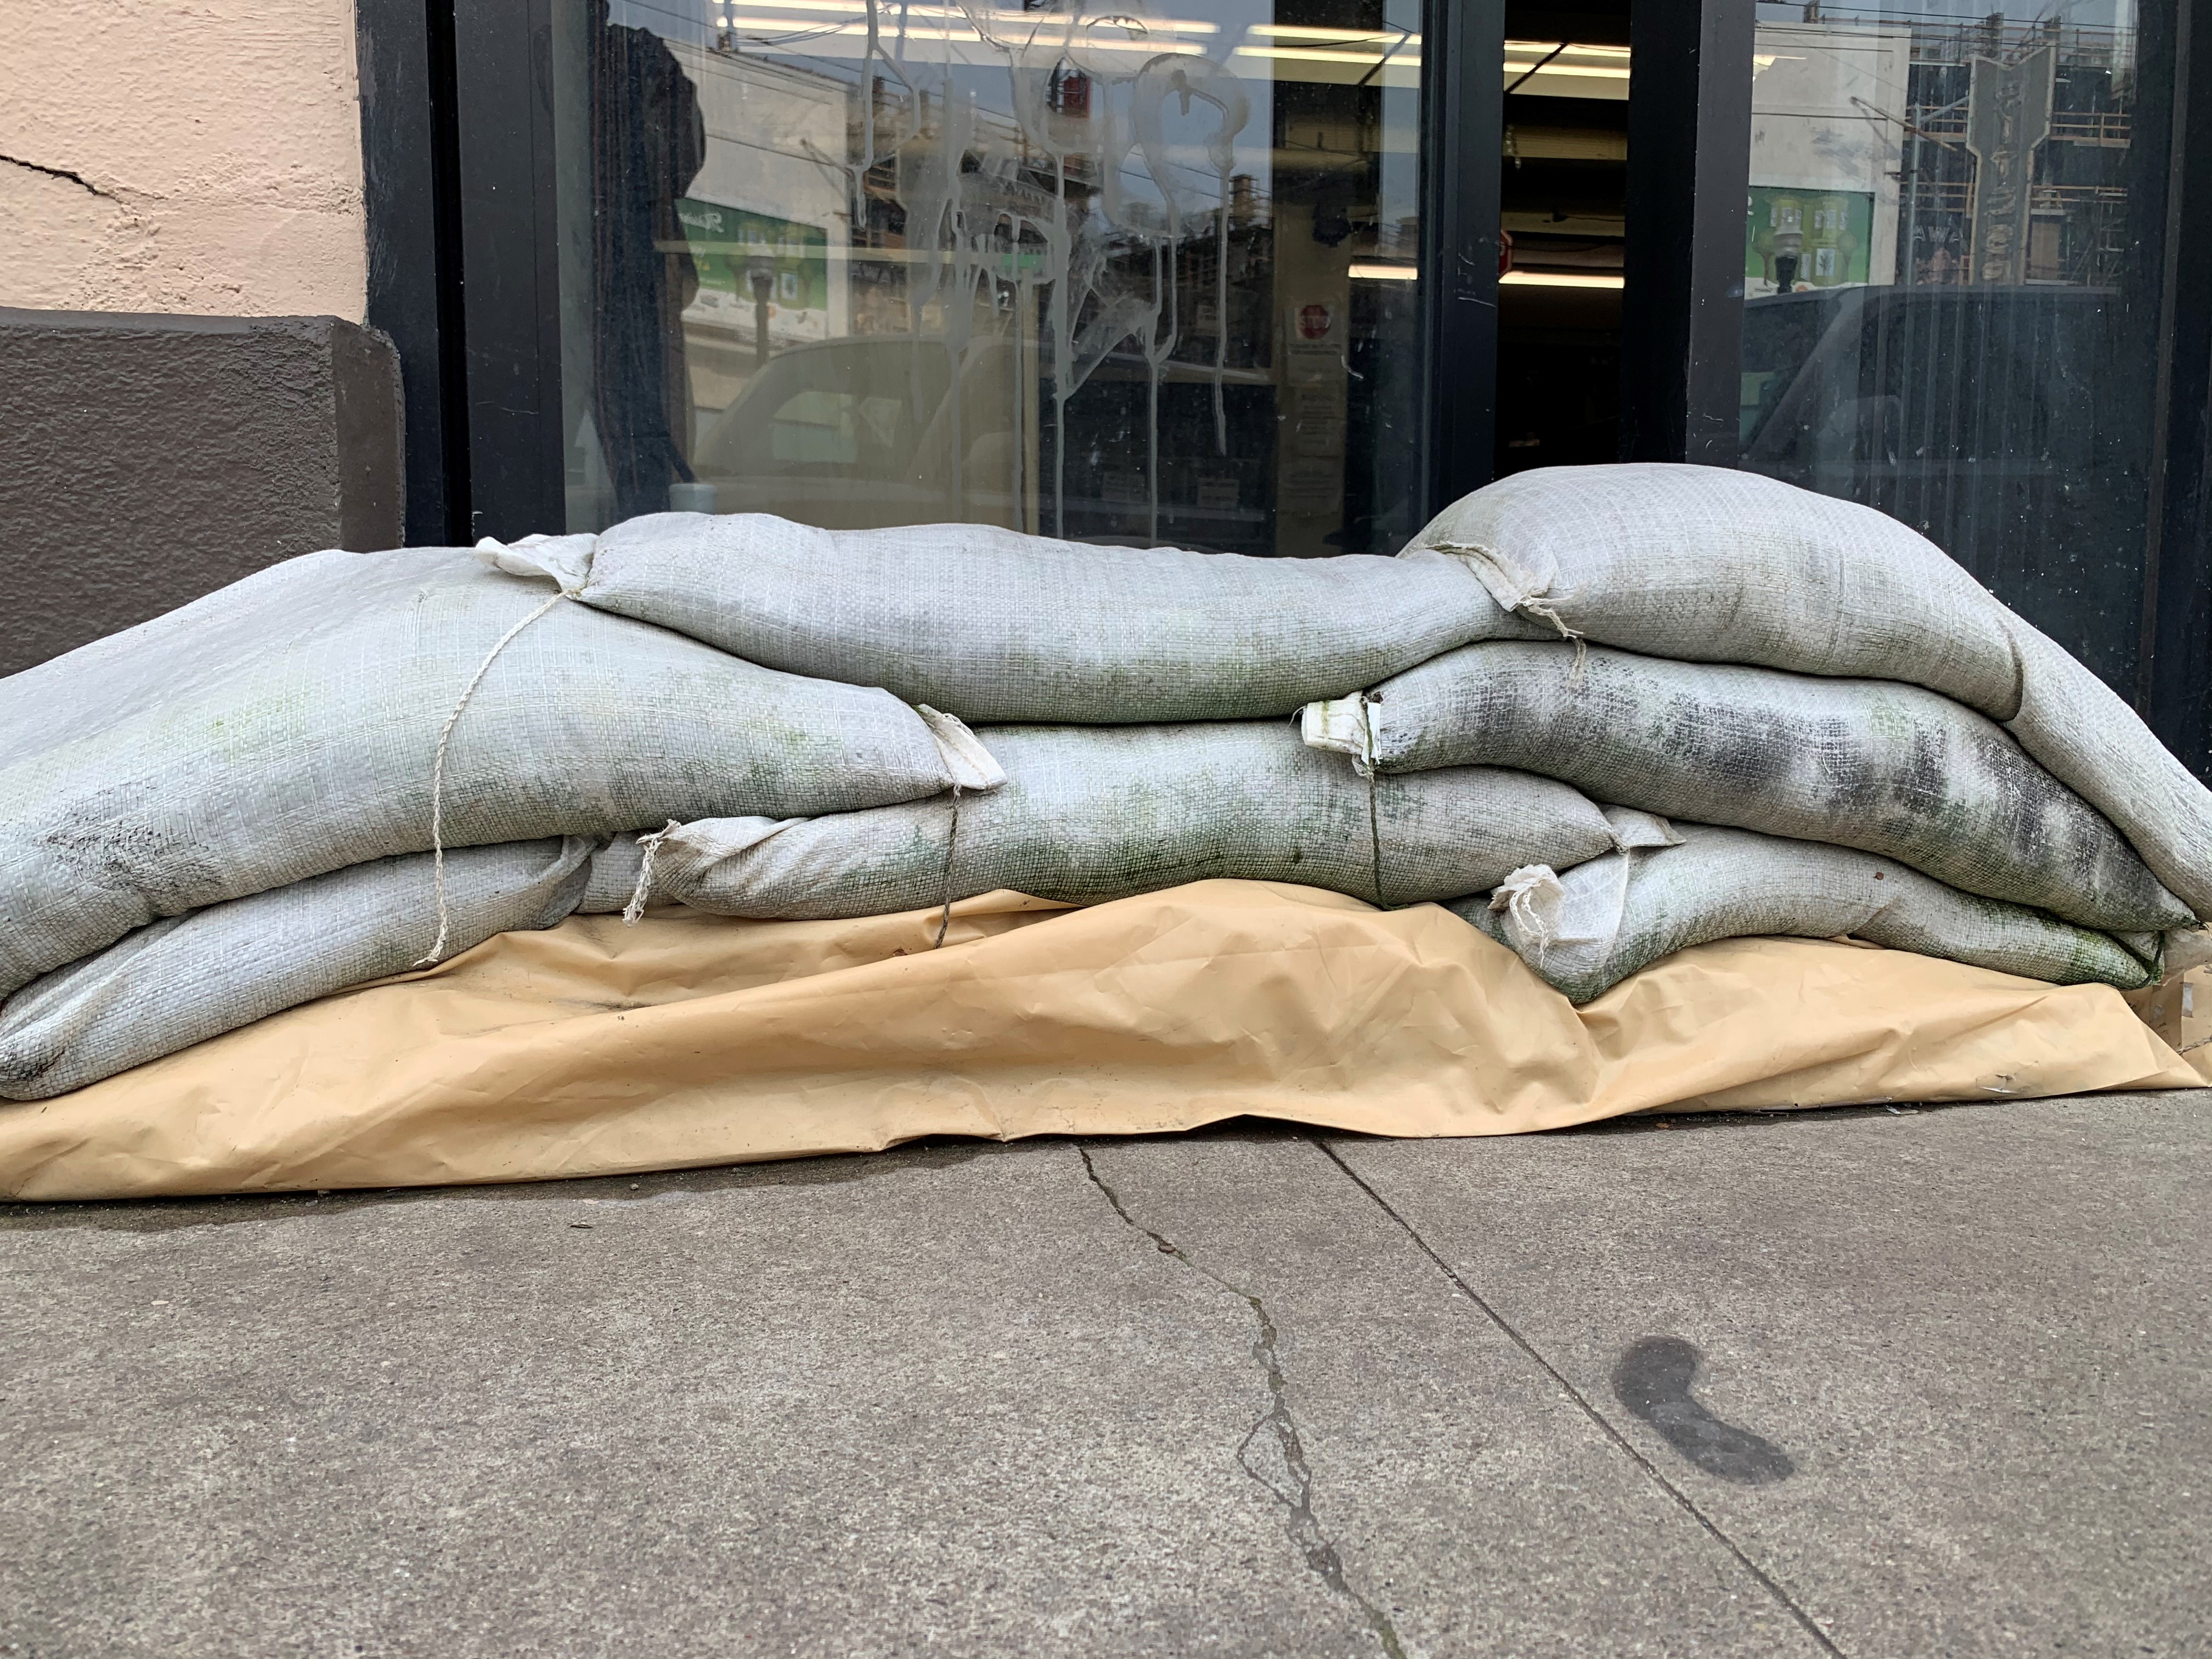 sand bags laid is a brick formation to show how to correctly place them.